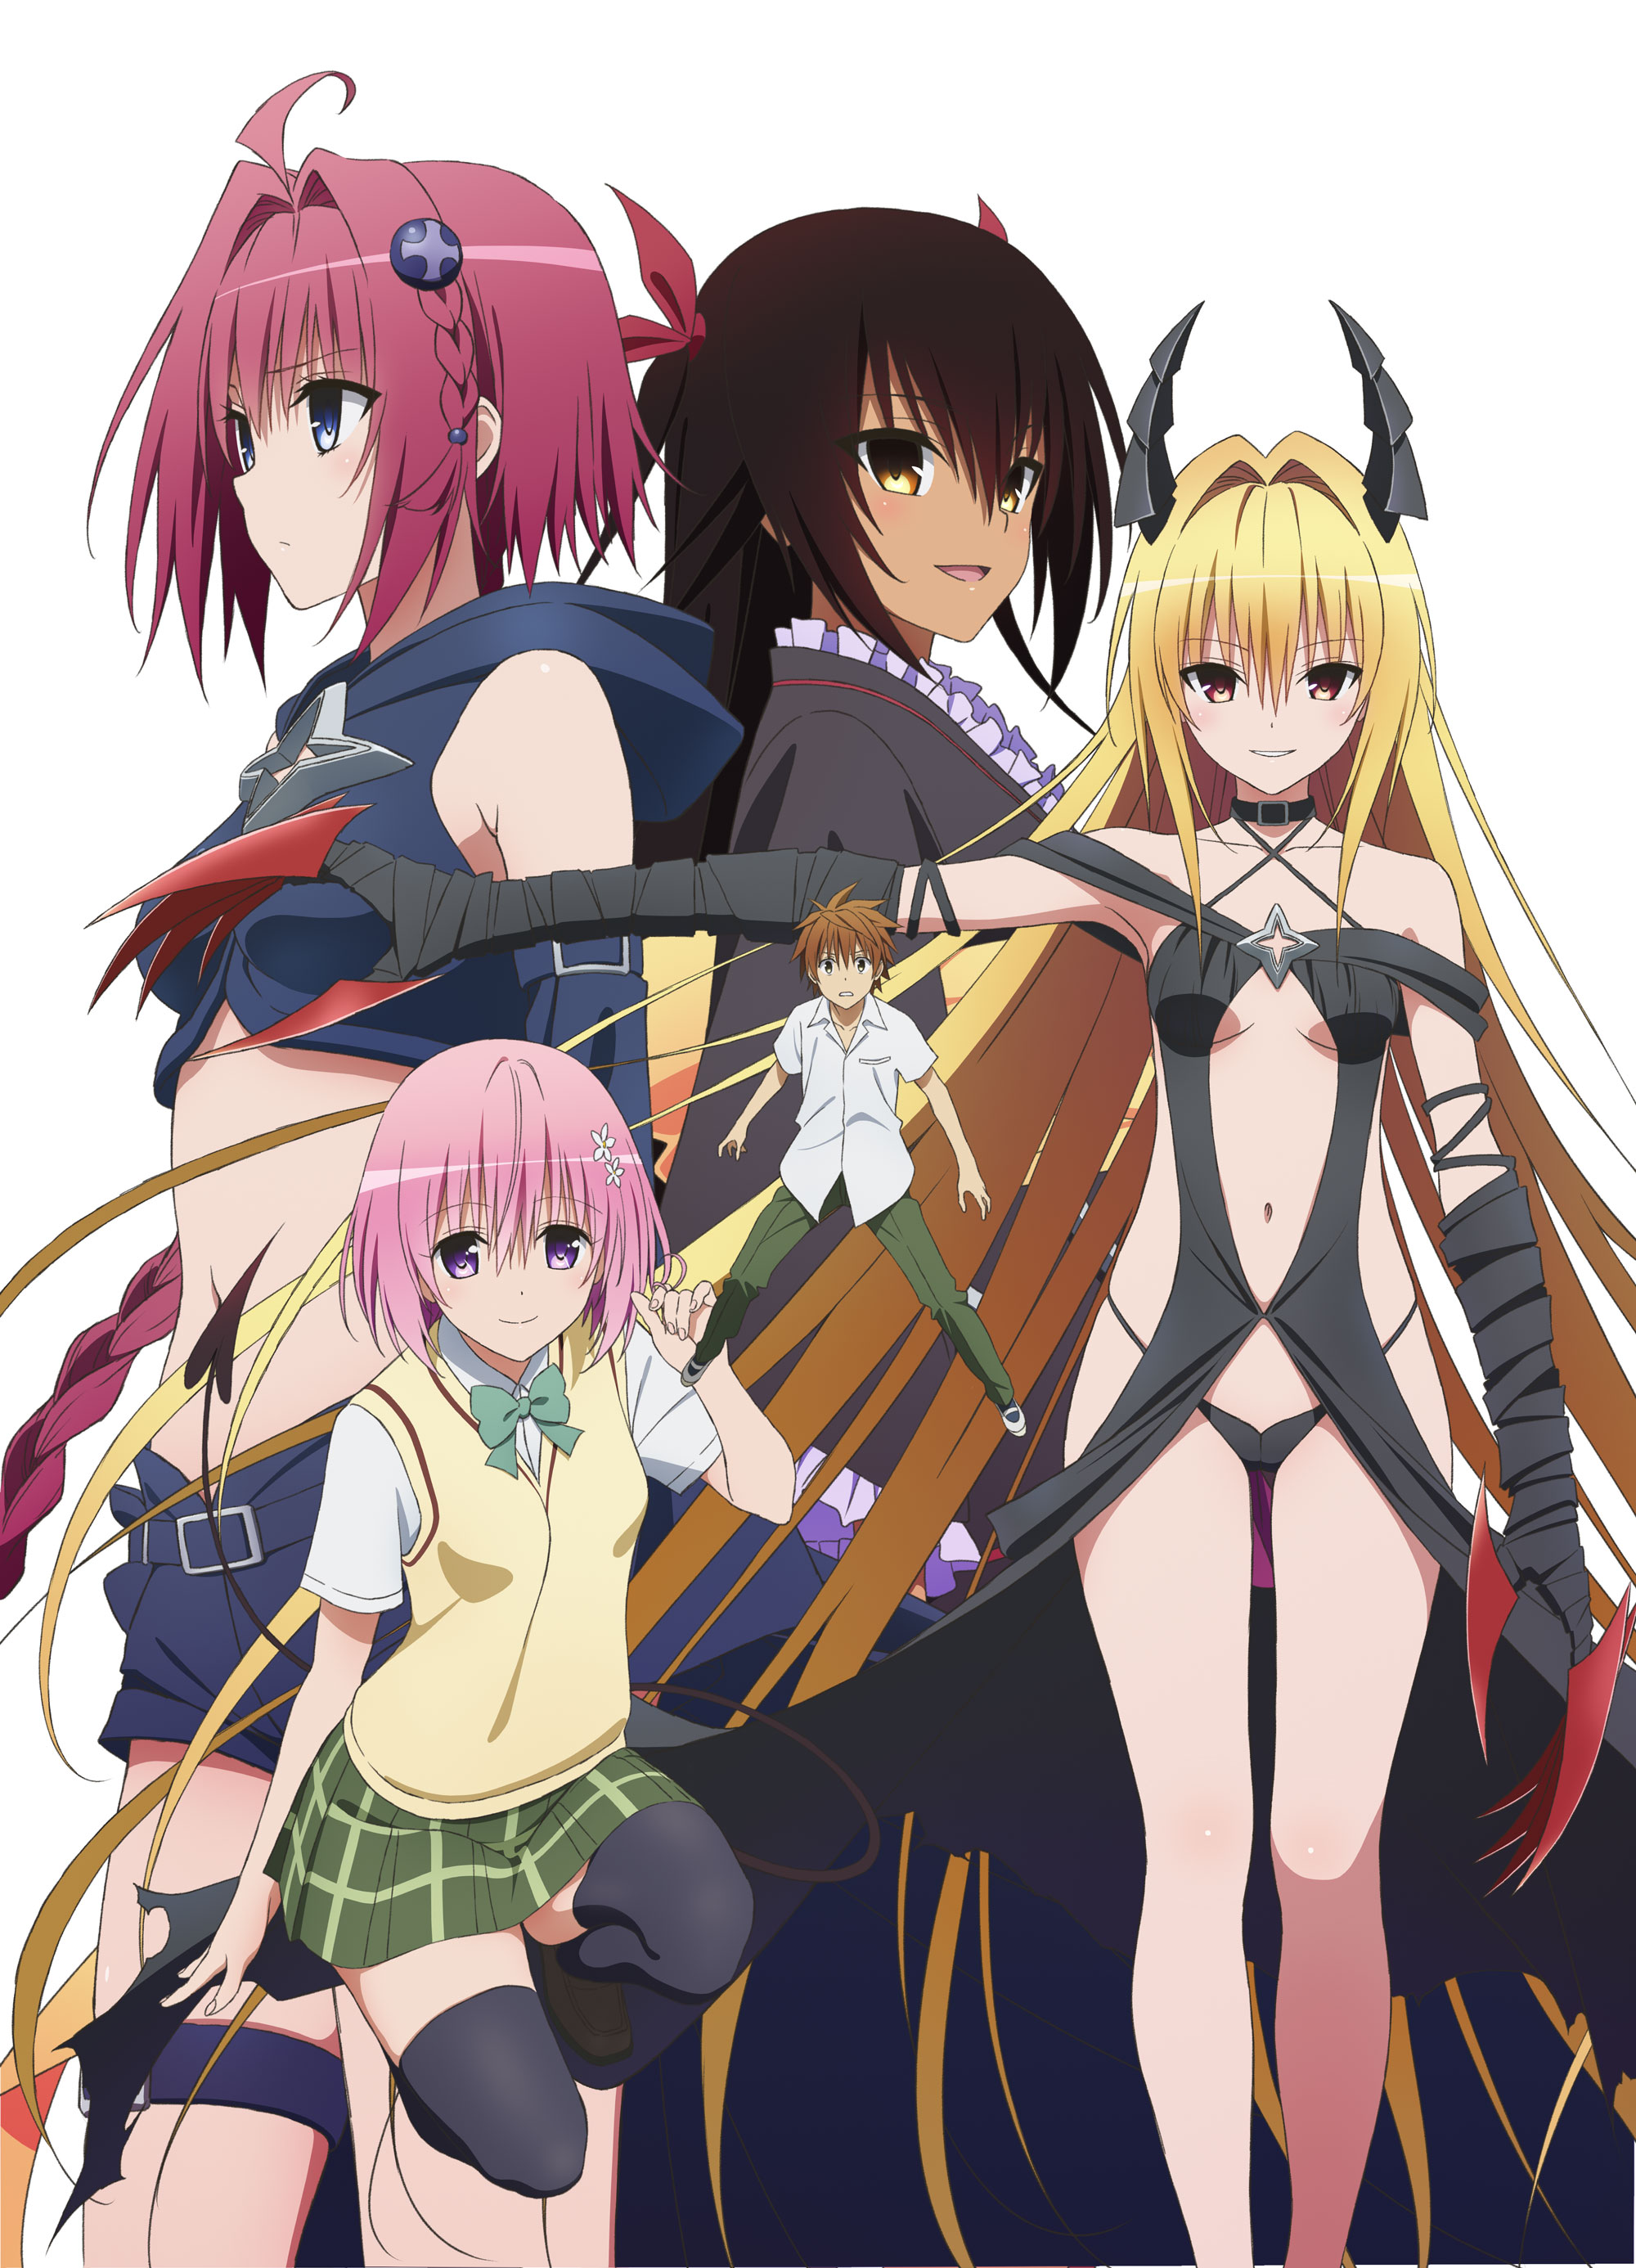 Review of To Love Ru (Motto To Love Ru, To Love Ru Darkness)